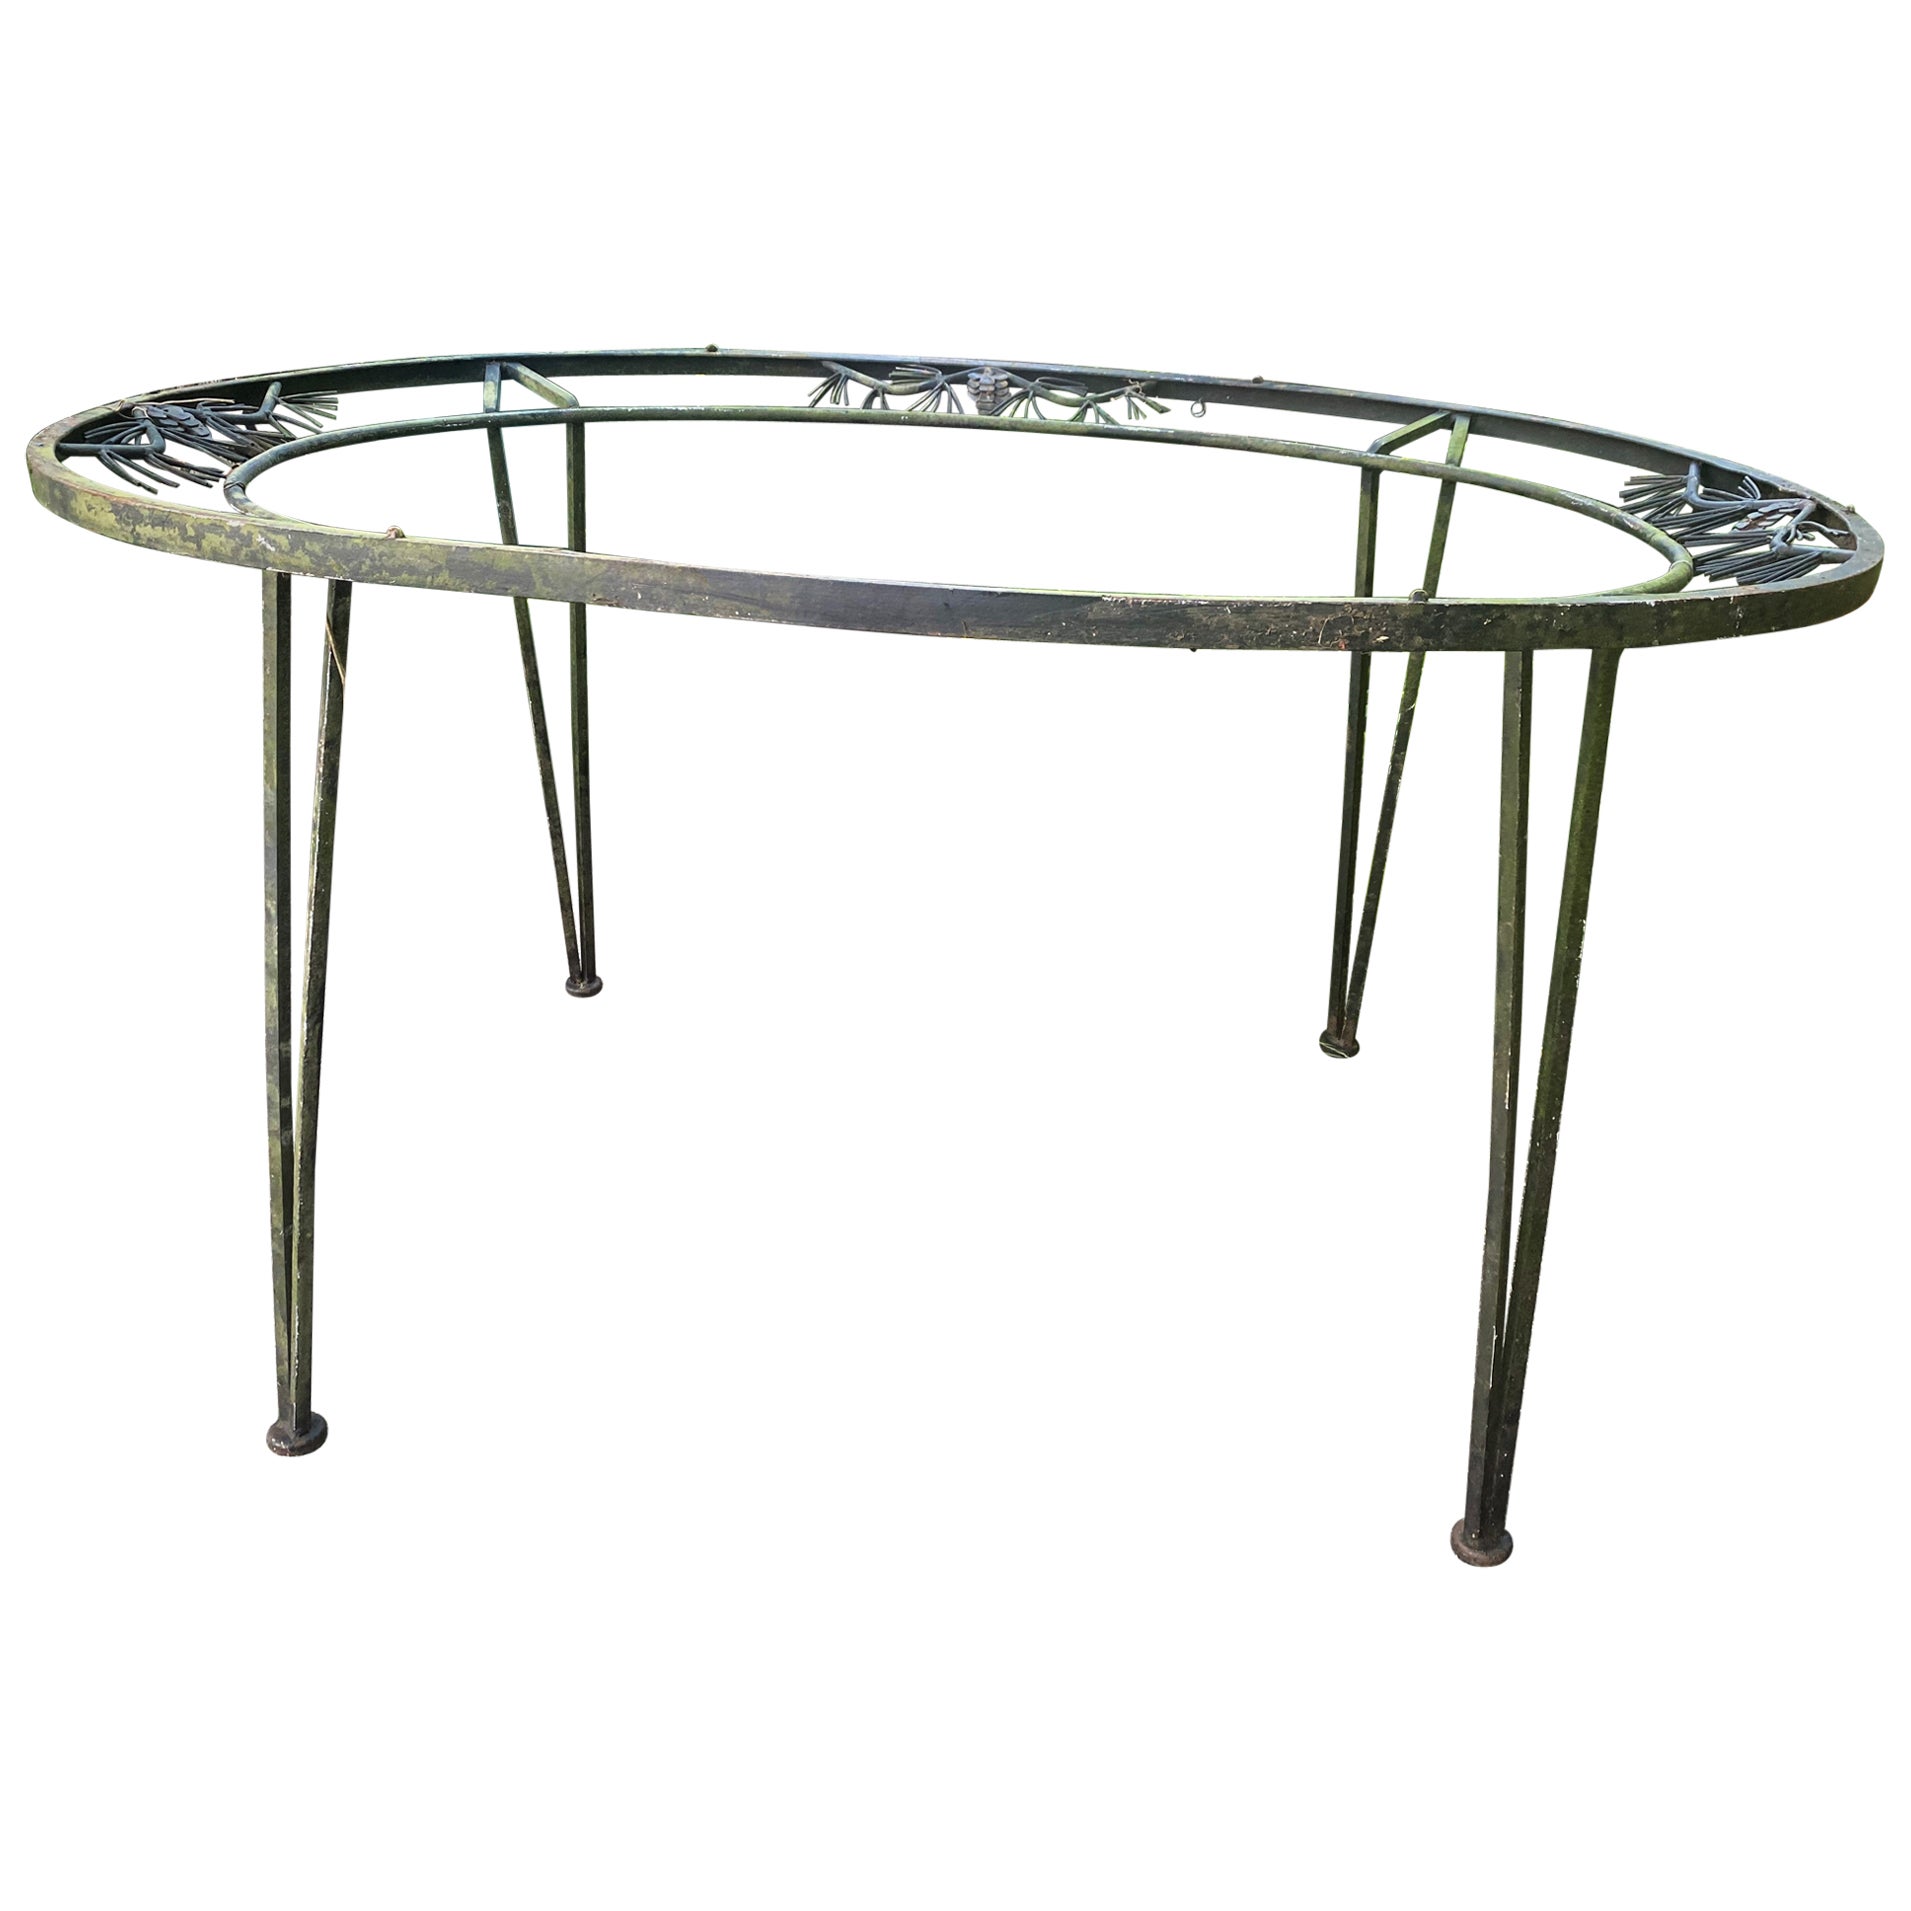 Vintage Woodard Pinecrest Wrought Iron Oval Table For Sale